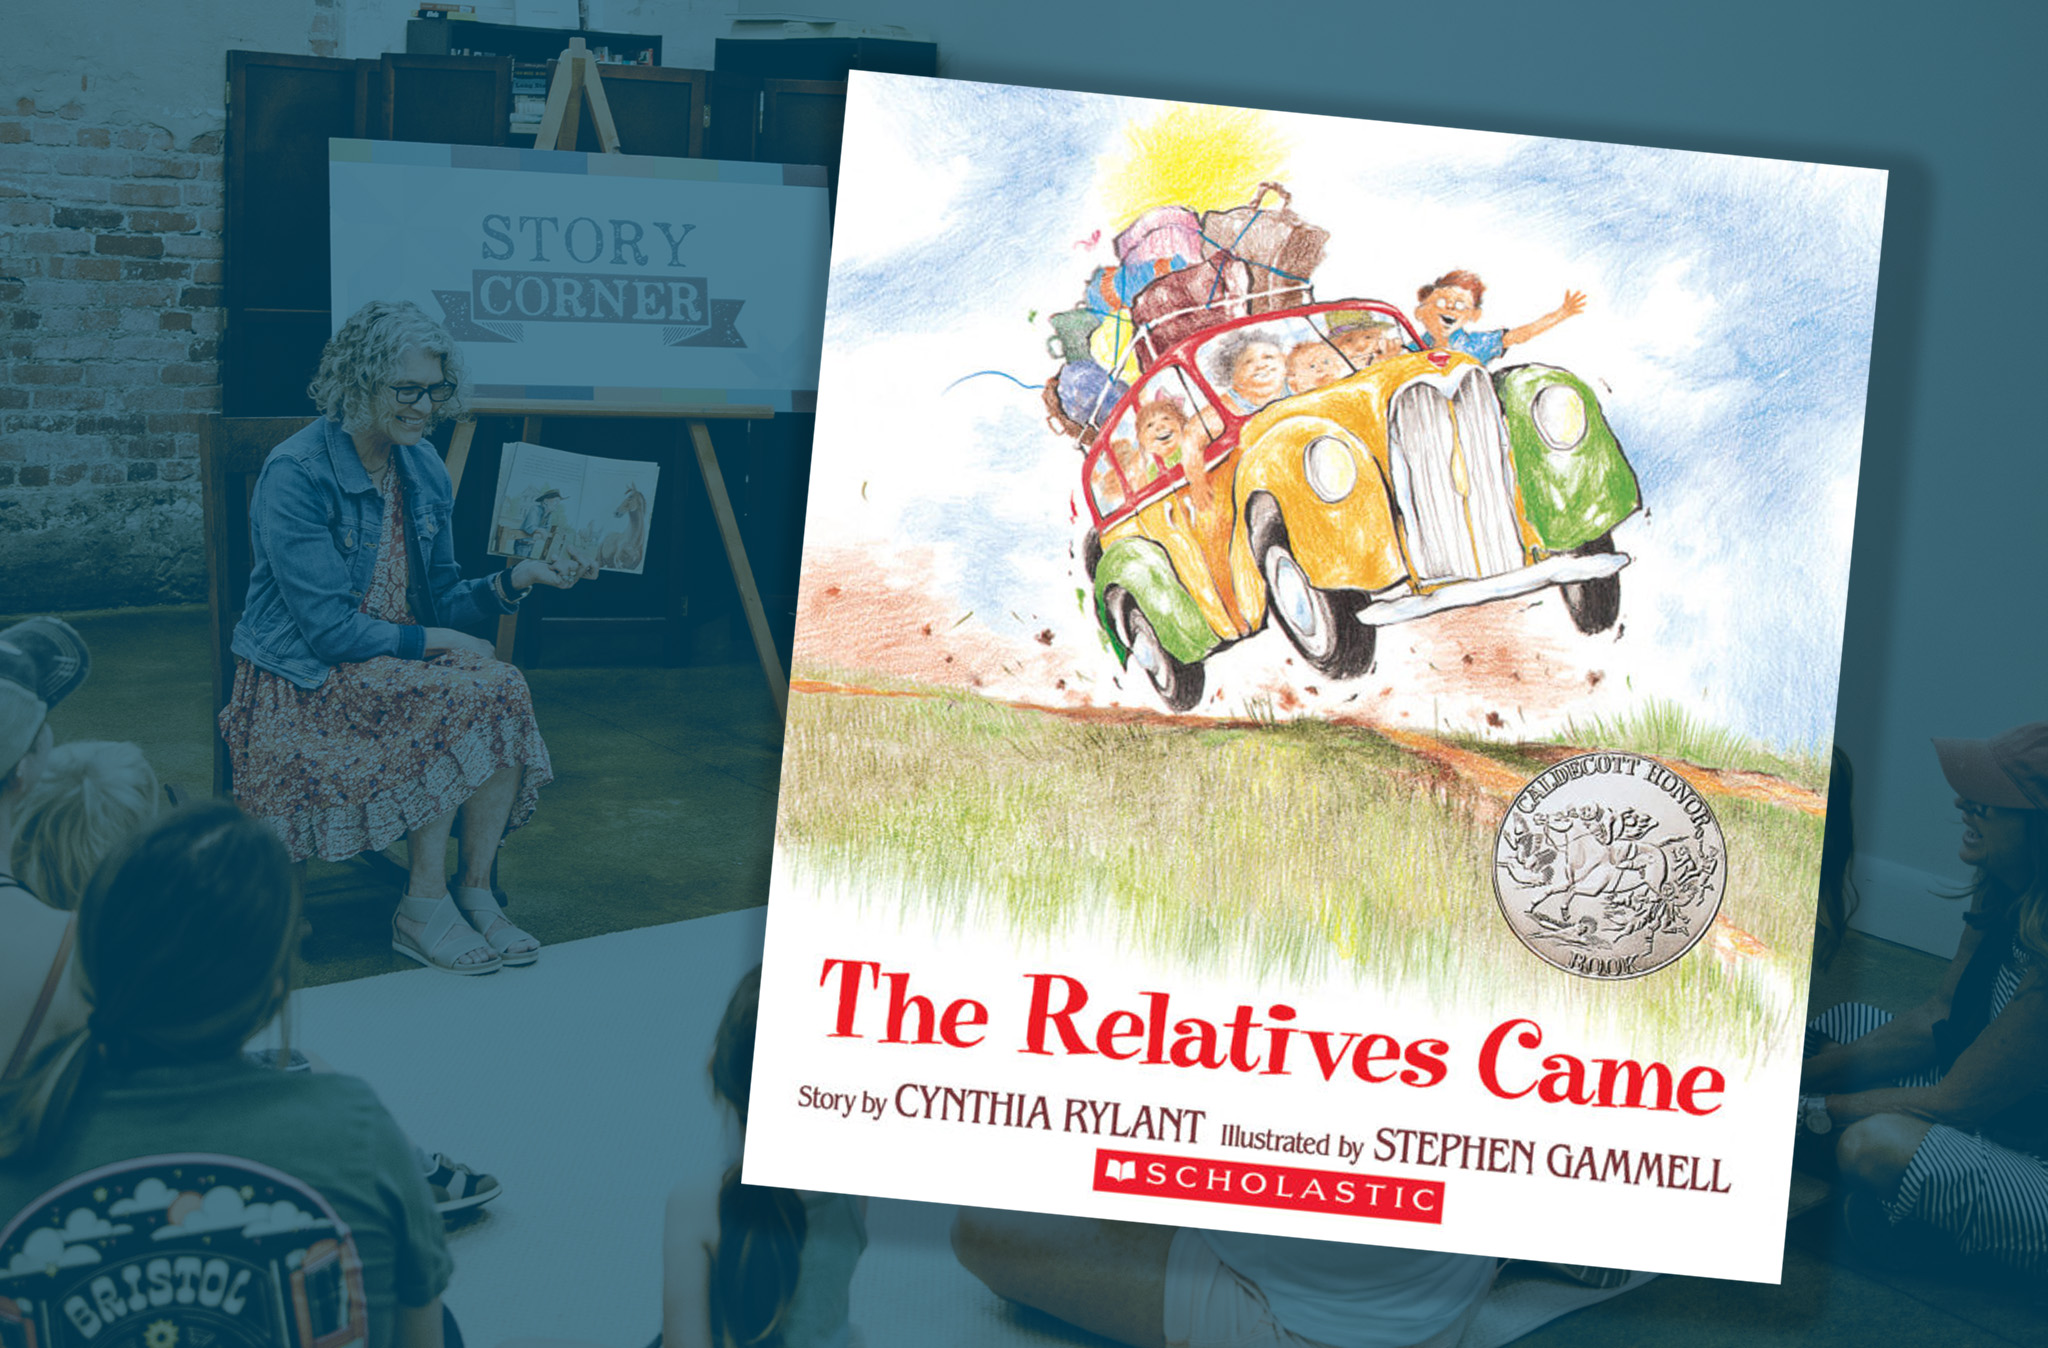 Museum Story Time – “The Relatives Came” by Cynthia Rylant